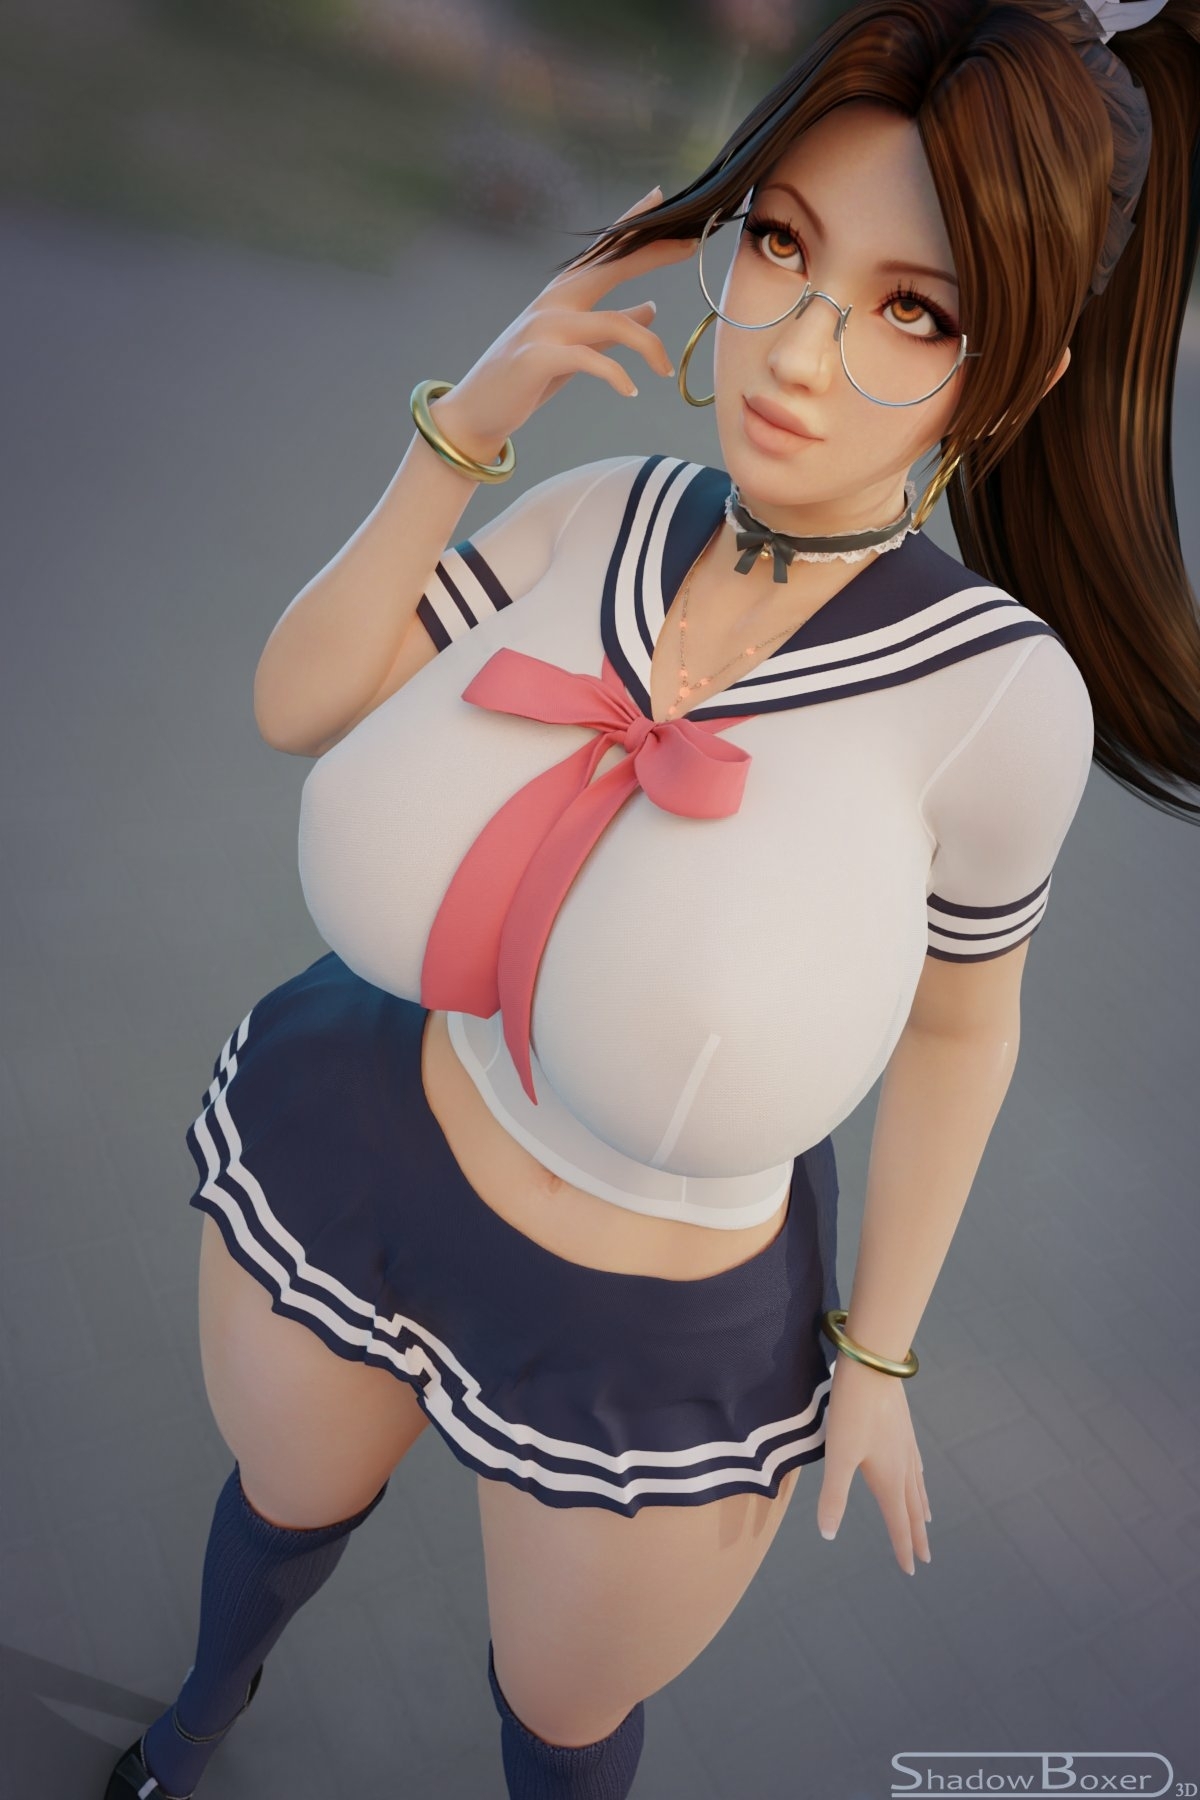 Mai is hecking THICC👀 Mai Shiranui King Of Fighters Nipples Lingerie Boobs Big boobs Cake Ass Big Ass Big Tits Tits Sexy Horny Face Horny 3d Porn